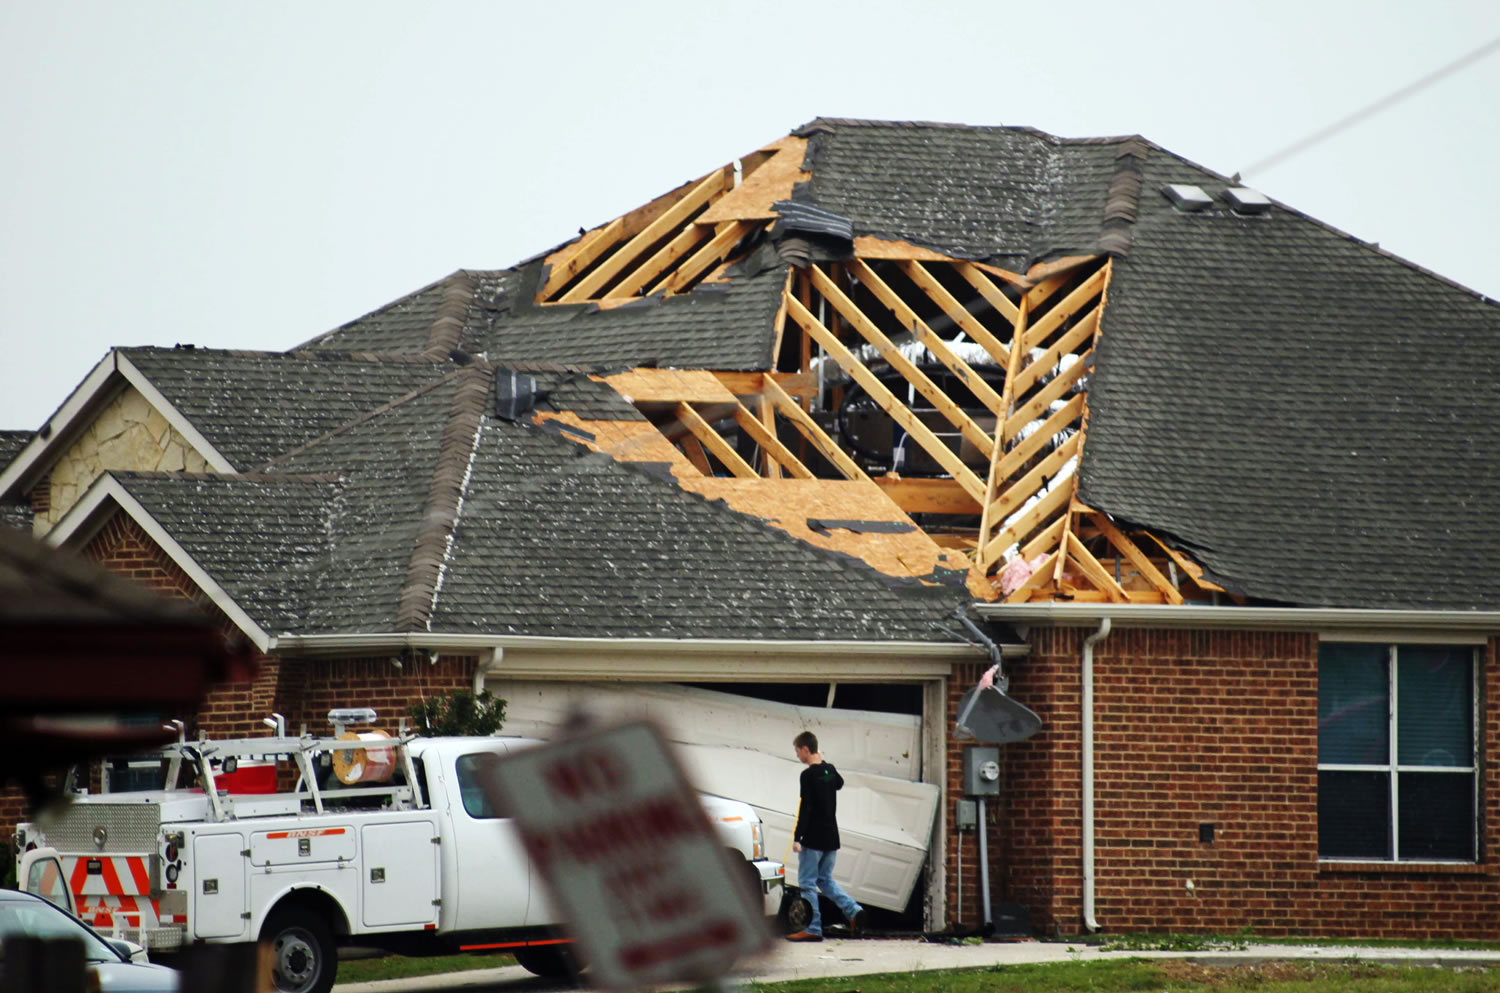 A man walks in front of a home damaged by Wednesday's tornado in Cleburne, Texas. Ten tornadoes touched down in several small communities in Texas overnight, leaving at least six people dead, dozens injured and hundreds homeless.